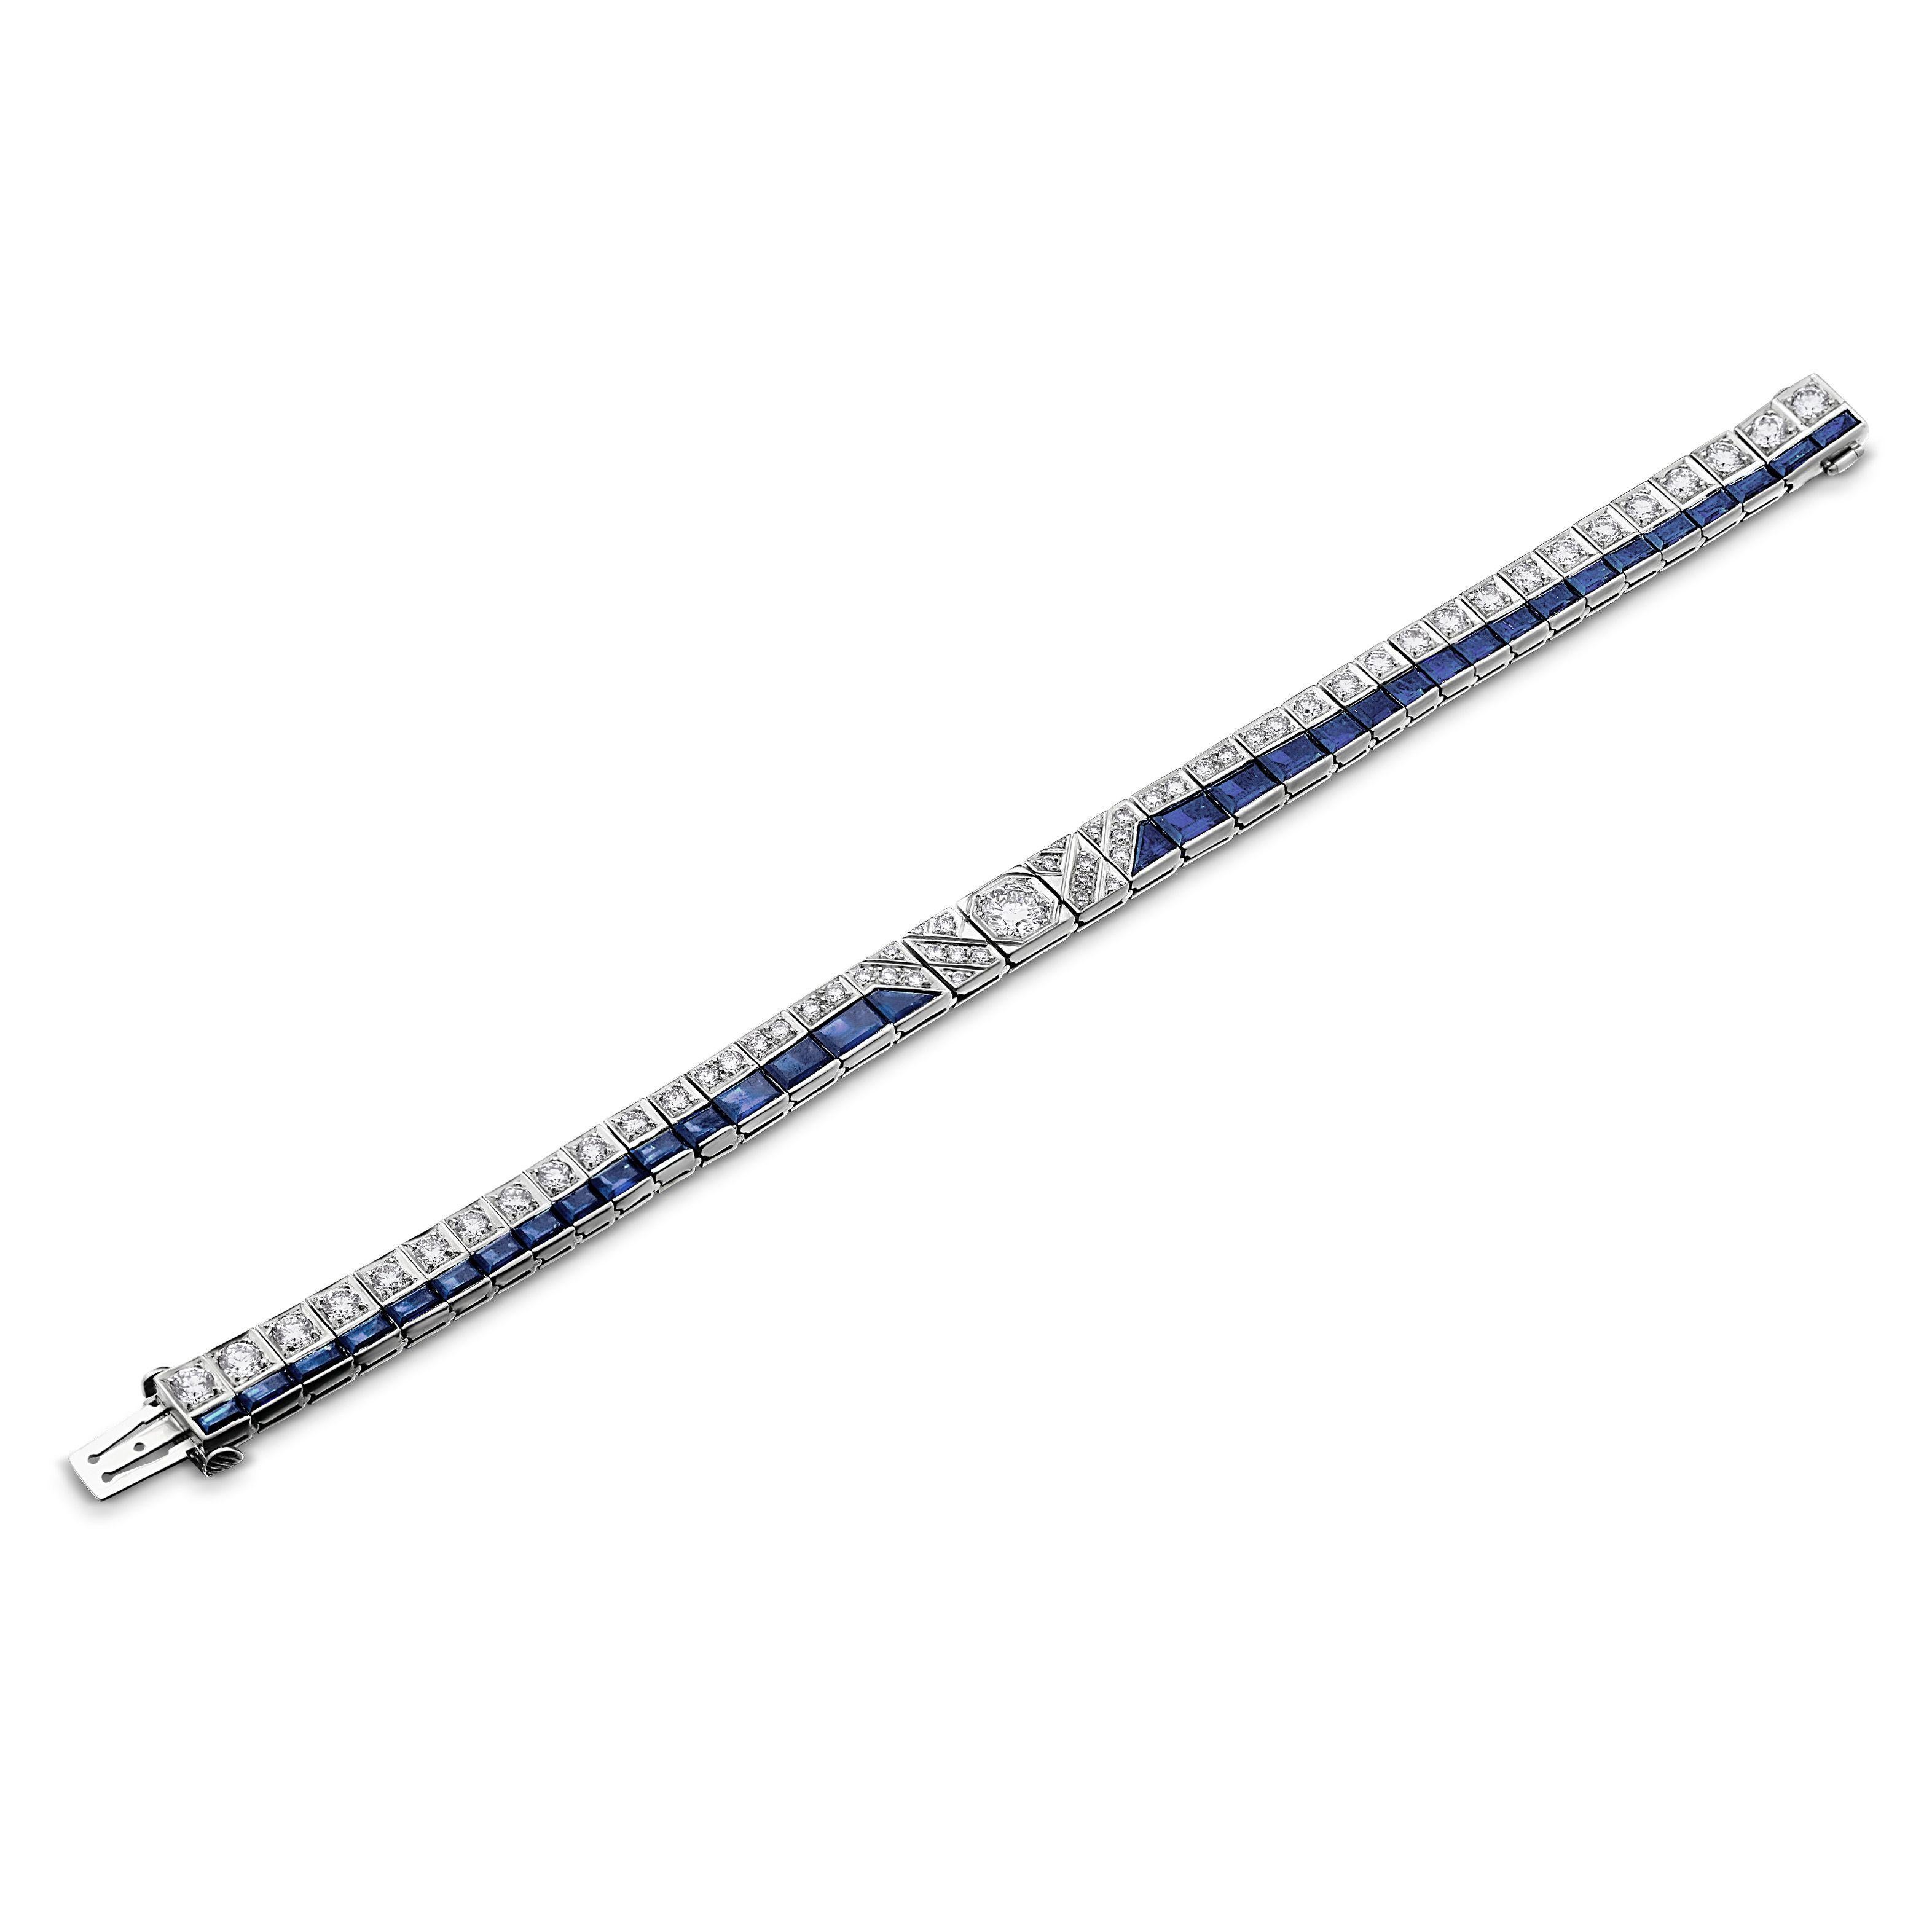 Simply Beautiful! Elegant and finely detailed Art Deco Revival Diamond and Blue Sapphire White Gold Bracelet. All Diamonds are round Brilliant-cut and Hand set; VS2; H color. Center Diamond, approx. 0.64 Carat, 8 Diamonds, approx. 1.28tcw, 16